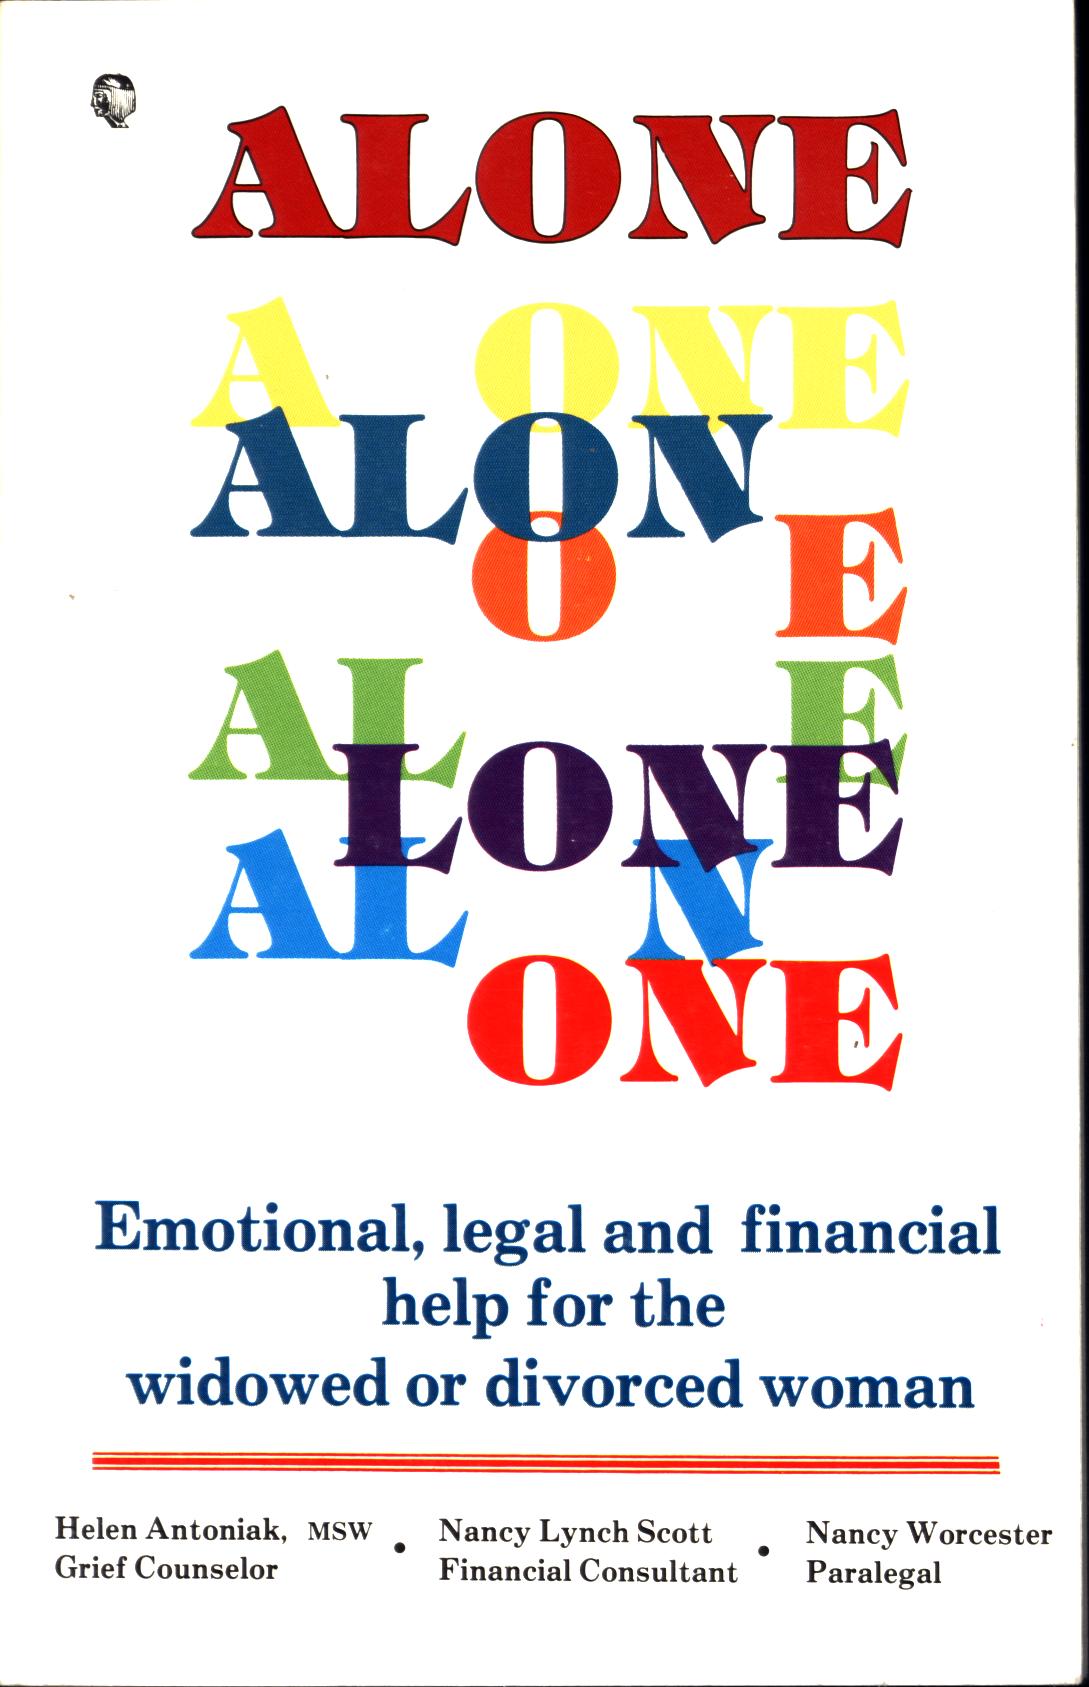 ALONE: emotional, legal and financial help for the widowed or divorced woman. 